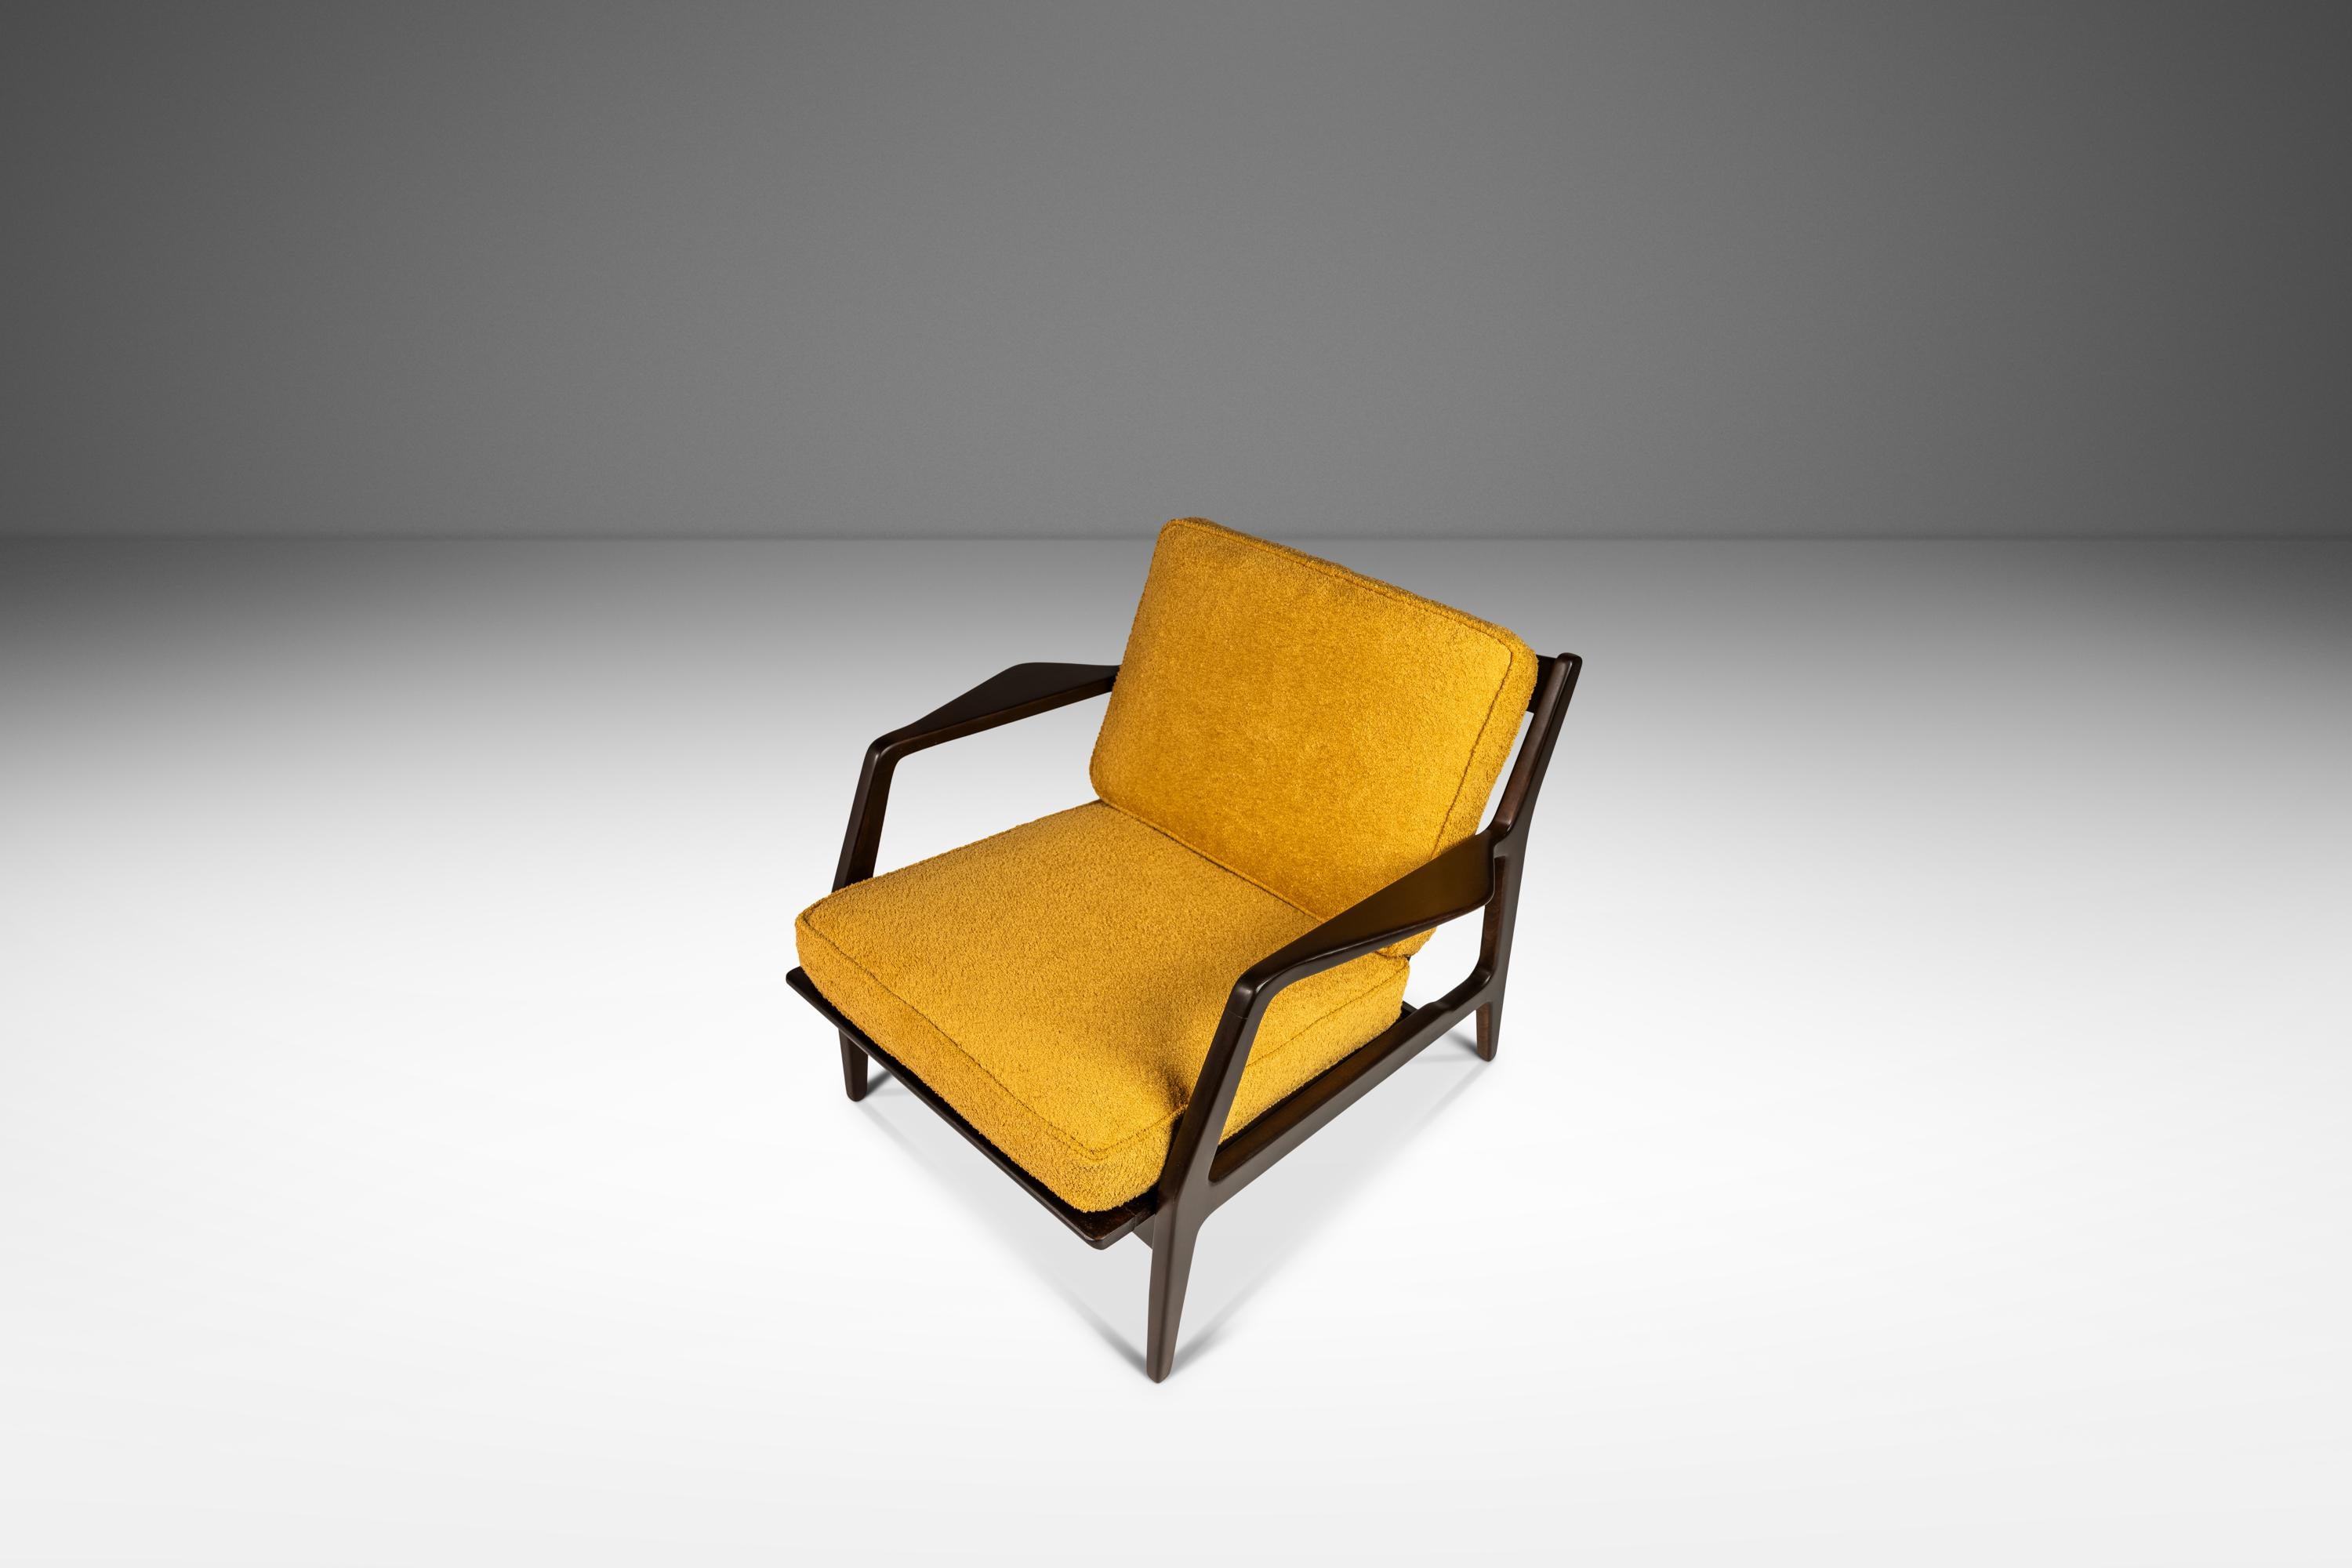 Mid-20th Century Model 596 Lounge Chair by Lawrence Peabody & Ib Kofod Larsen for Selig, c. 1950s For Sale